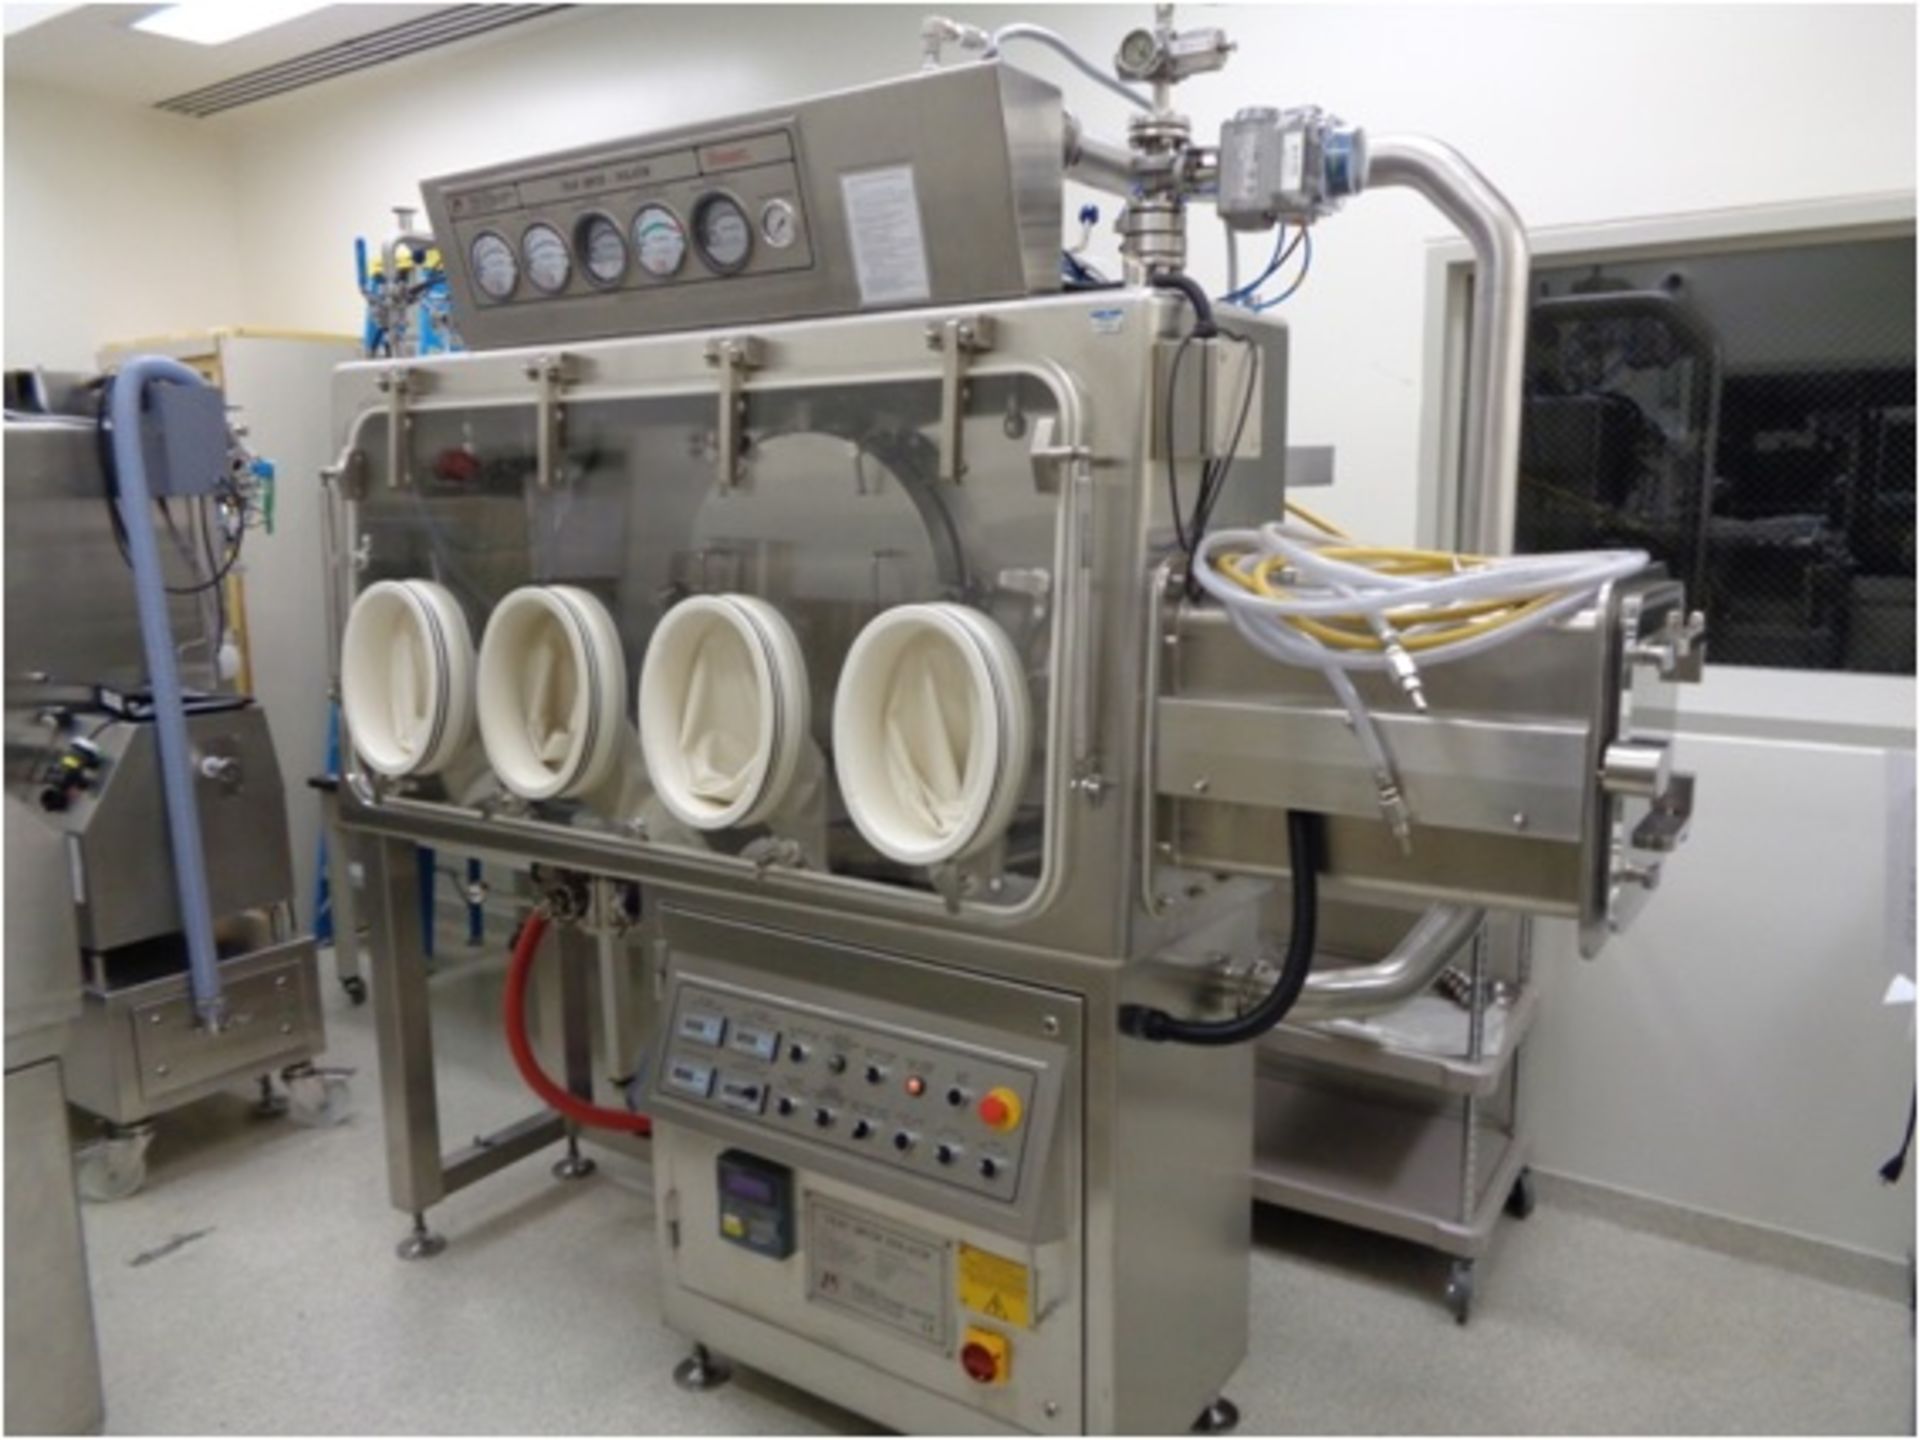 Powder Systems Limited(PSL) Tray Dryer Stainless Steel Isolator, complete with 4 tray oven